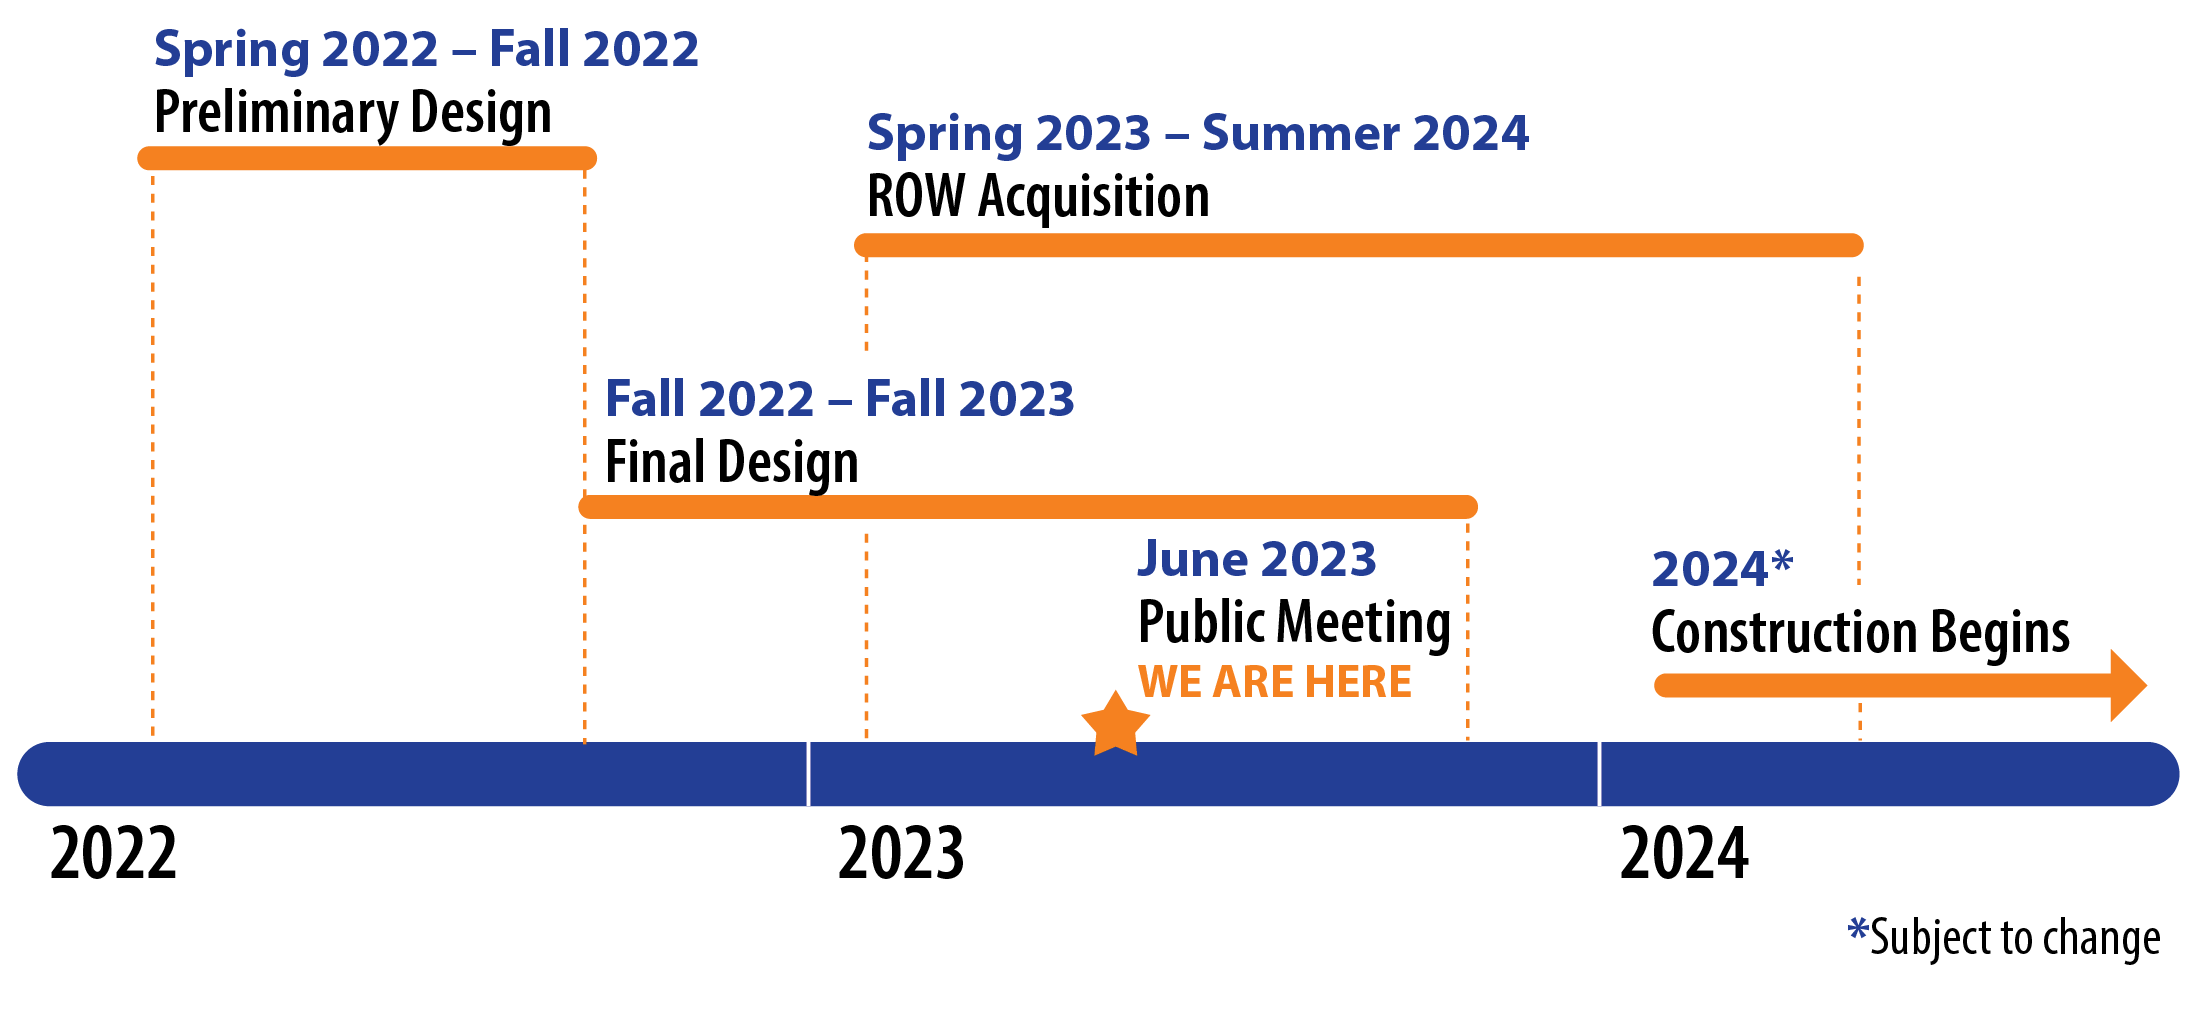 Spring 2022 – Spring 2023 Preliminary Design 
                                             Summer 2022 – Fall/Winter 2023 ROW Acquisition 
                                             Spring 2023 – Fall/Winter 2023 Final Design 
                                             2024* Construction Begins *Subject to change 
                                             May 2022 Public Meeting WE ARE HERE 
                                             